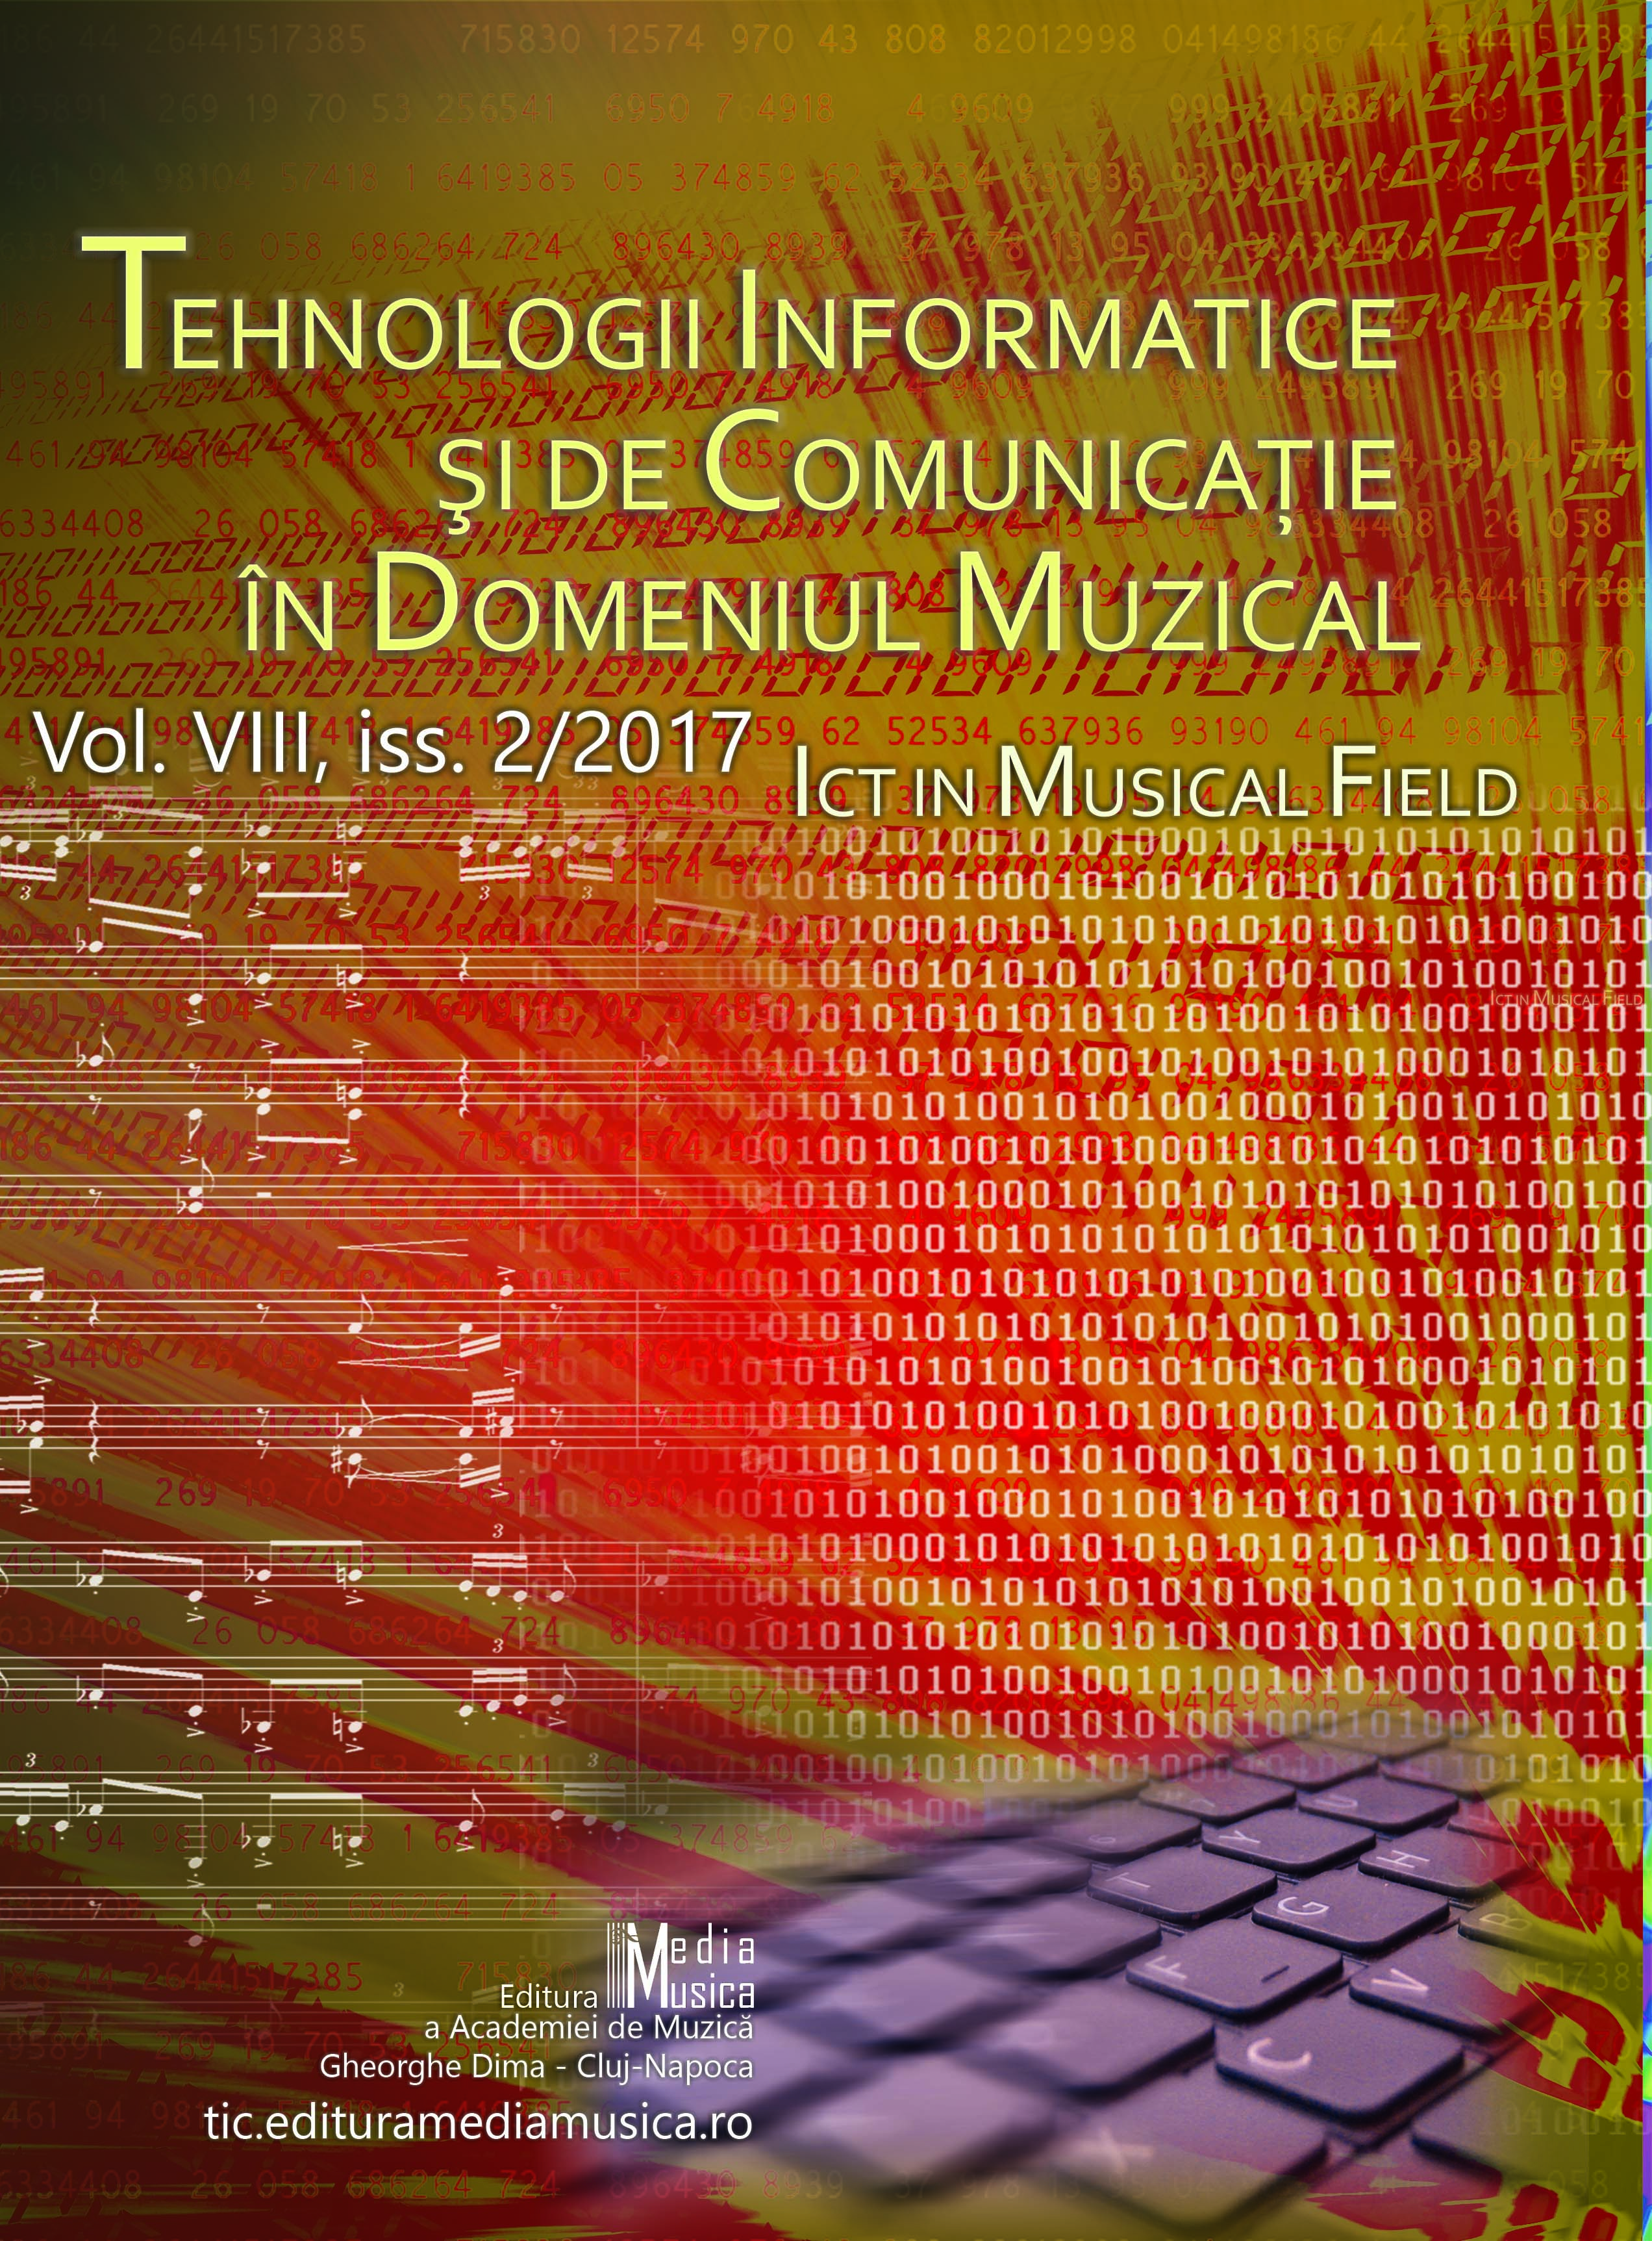 The Retrospective of Romanian Research Activity in Musicology, from the Perspective of Scientific Publications Cover Image